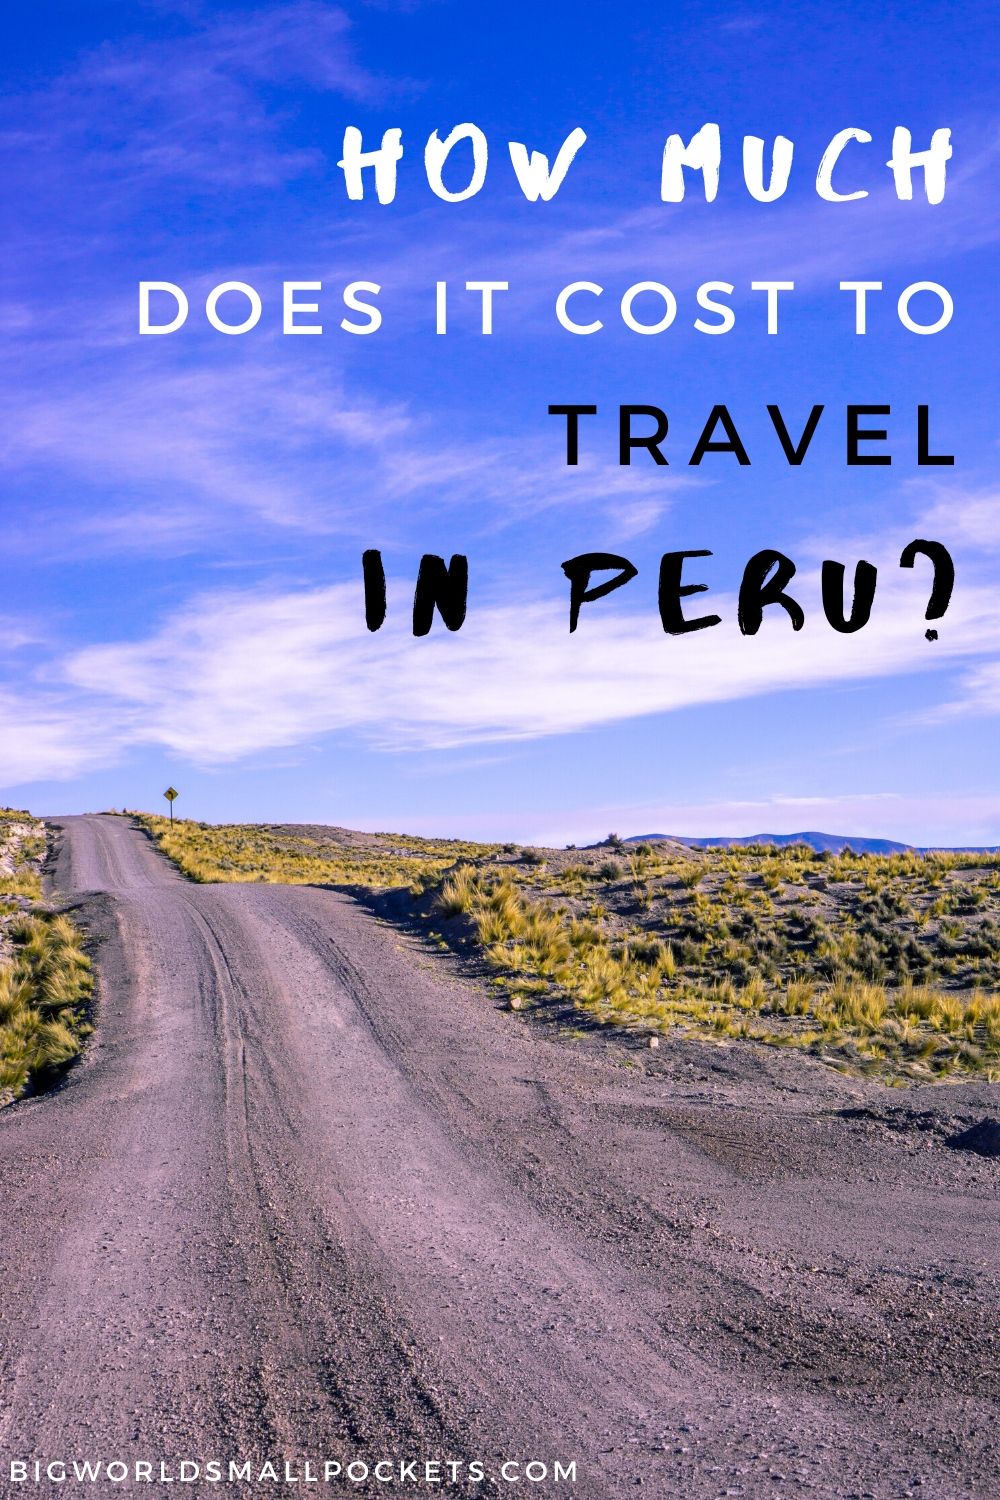 How Mauch Does It Cost to Travel Peru?